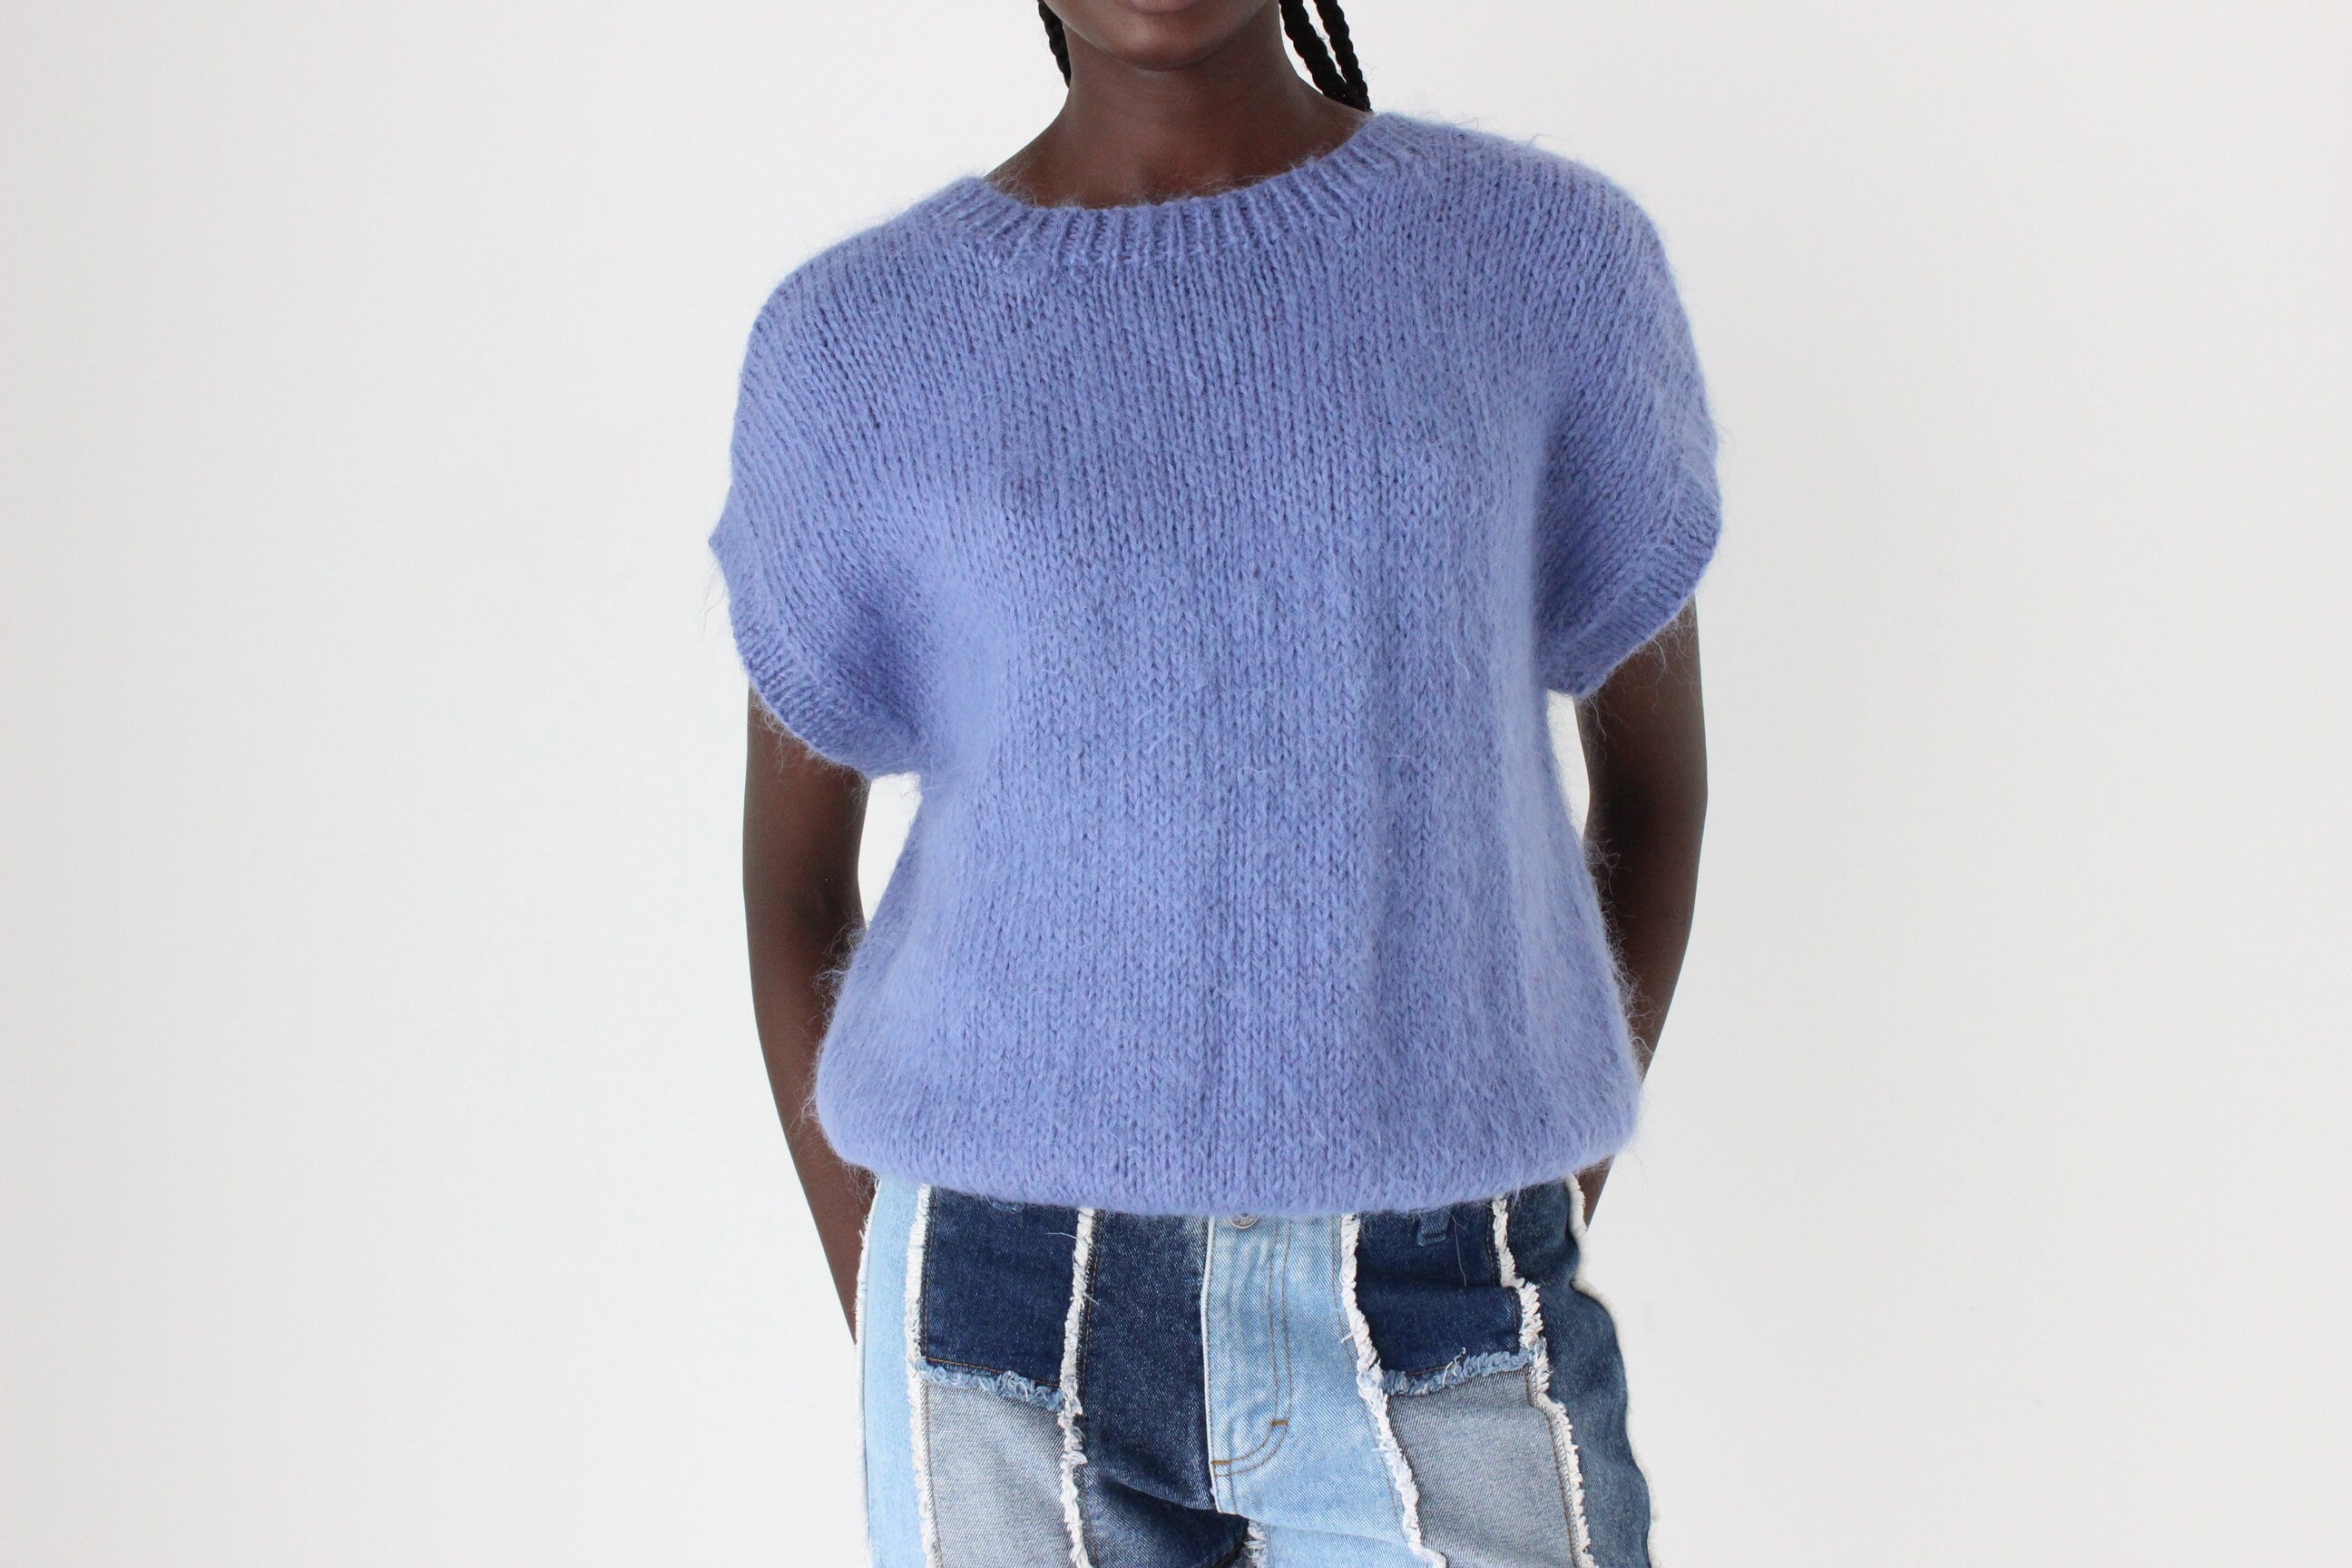 80s Textured Fluffy Mohair Knit Sweater Tee